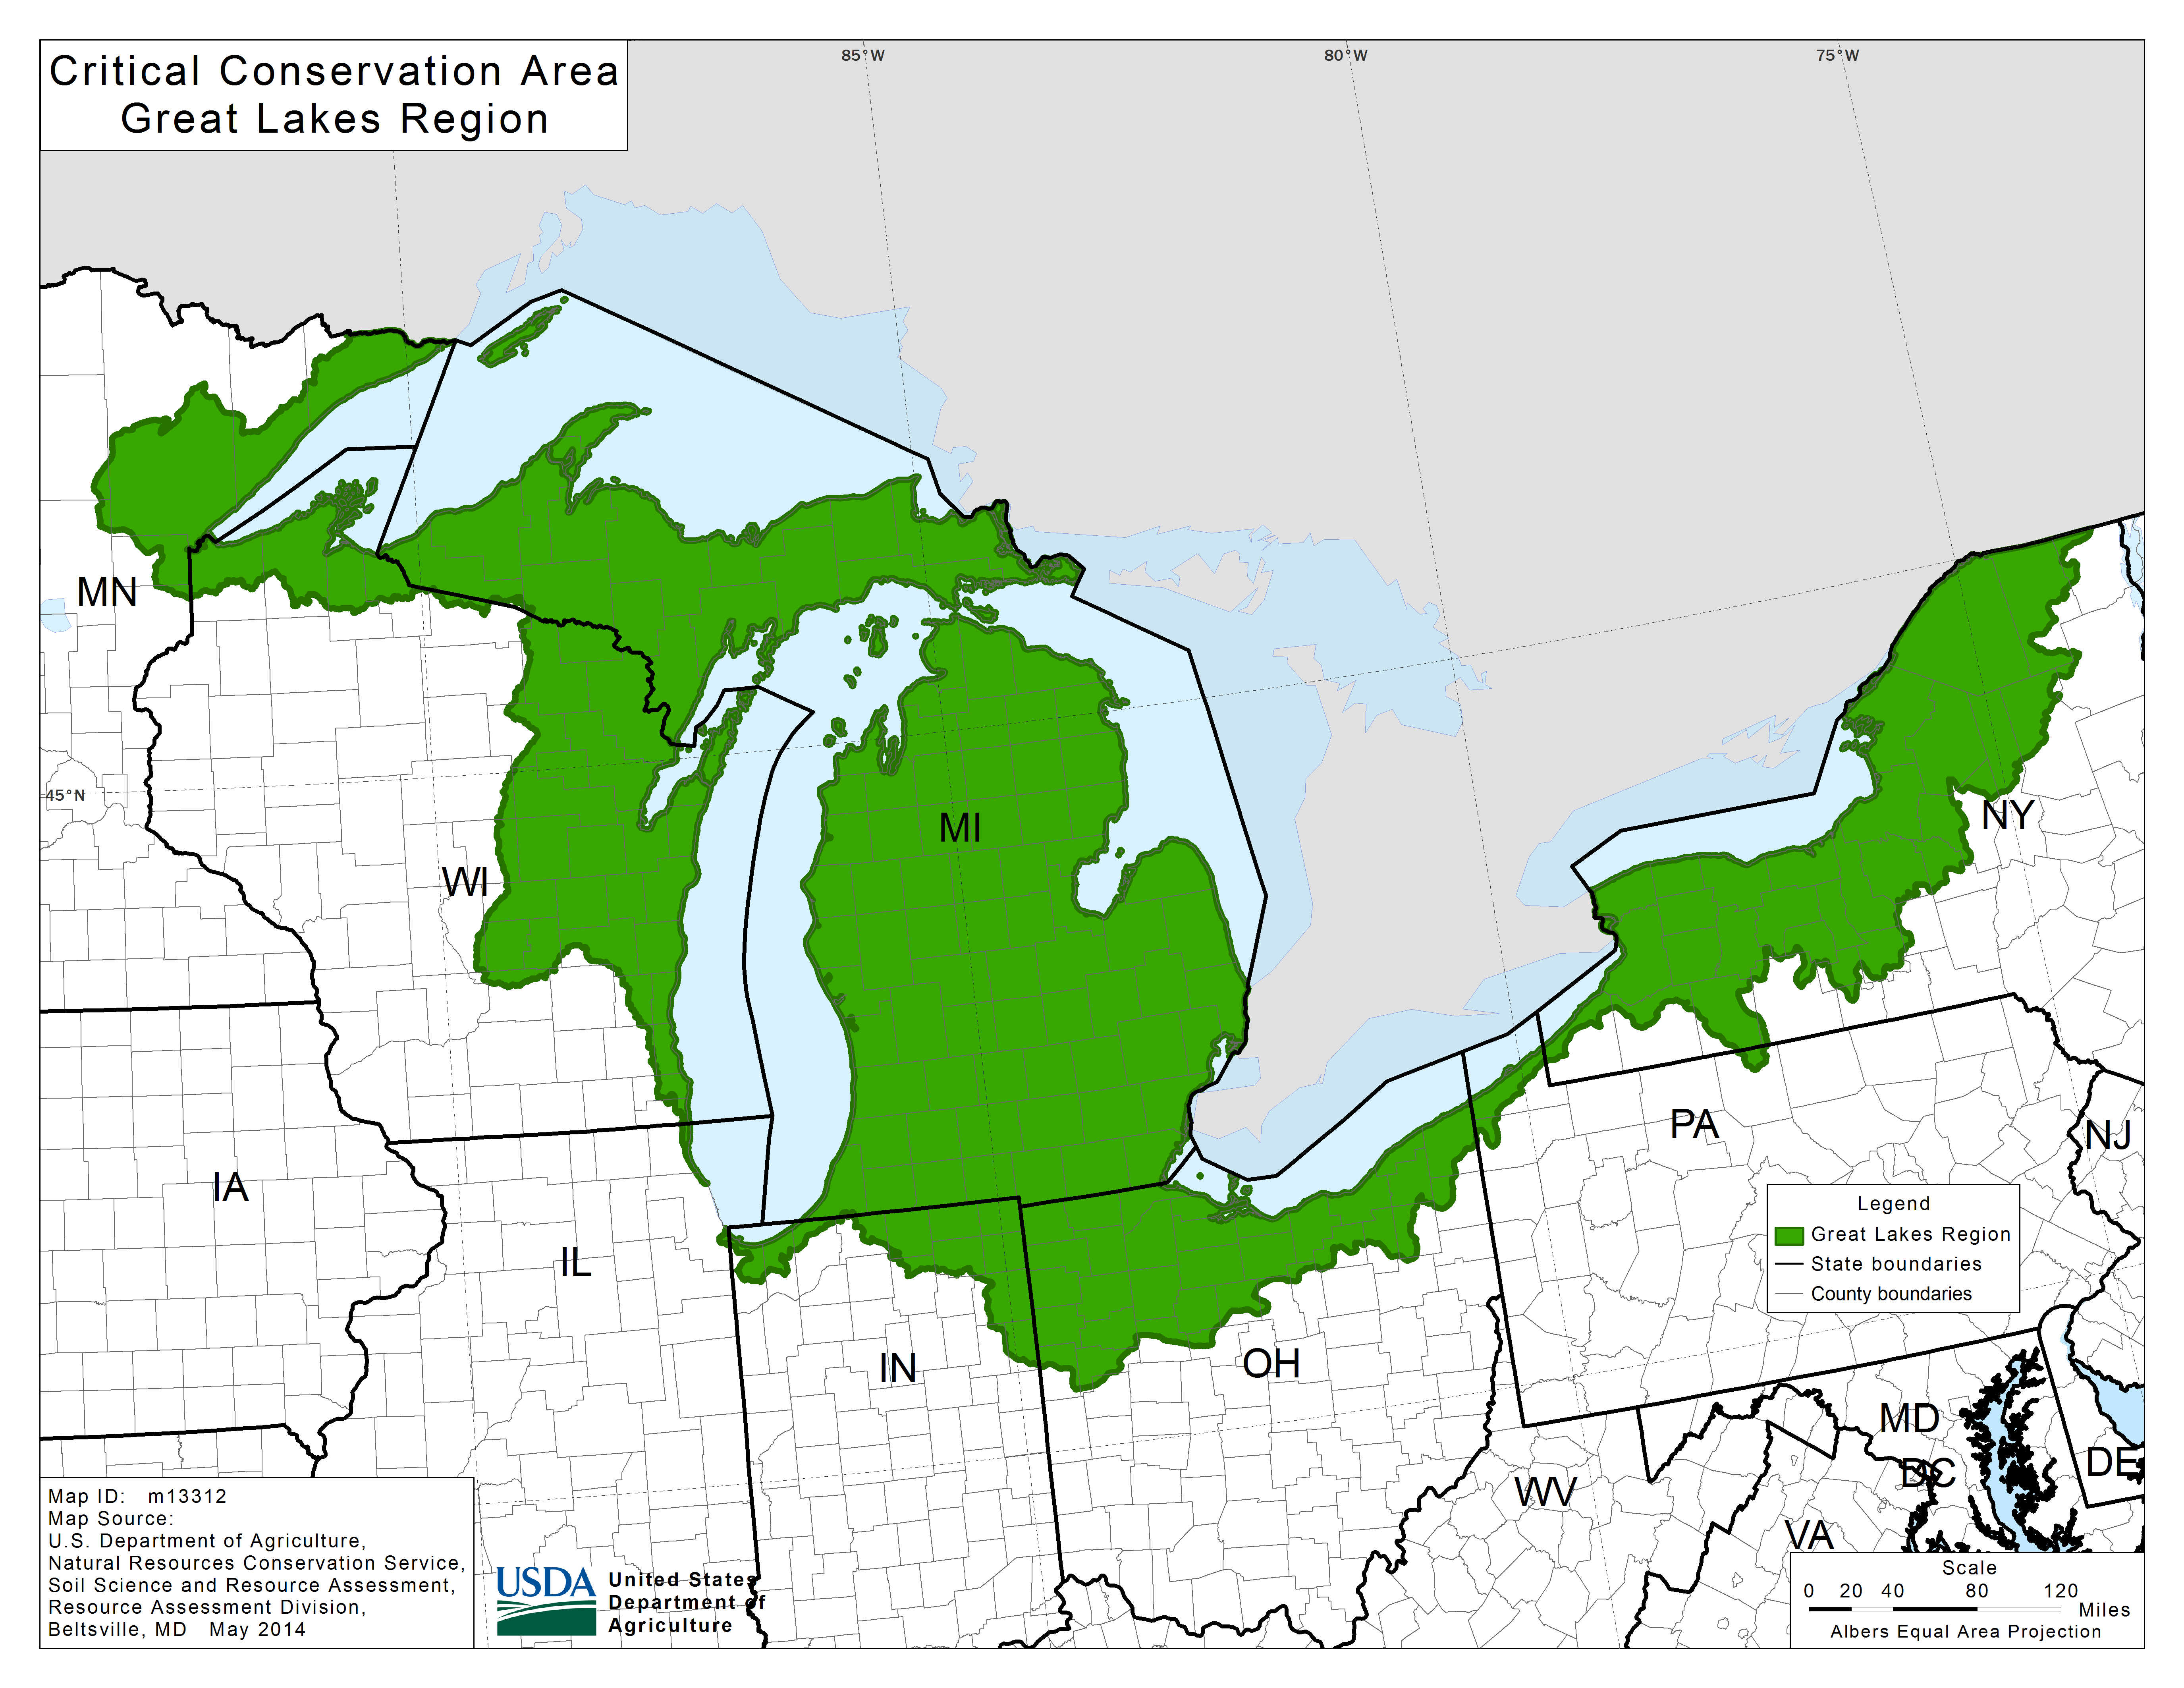 Thumbnail Of 2014 Great Lakes Region Cca Map Great Lakes Region Map 